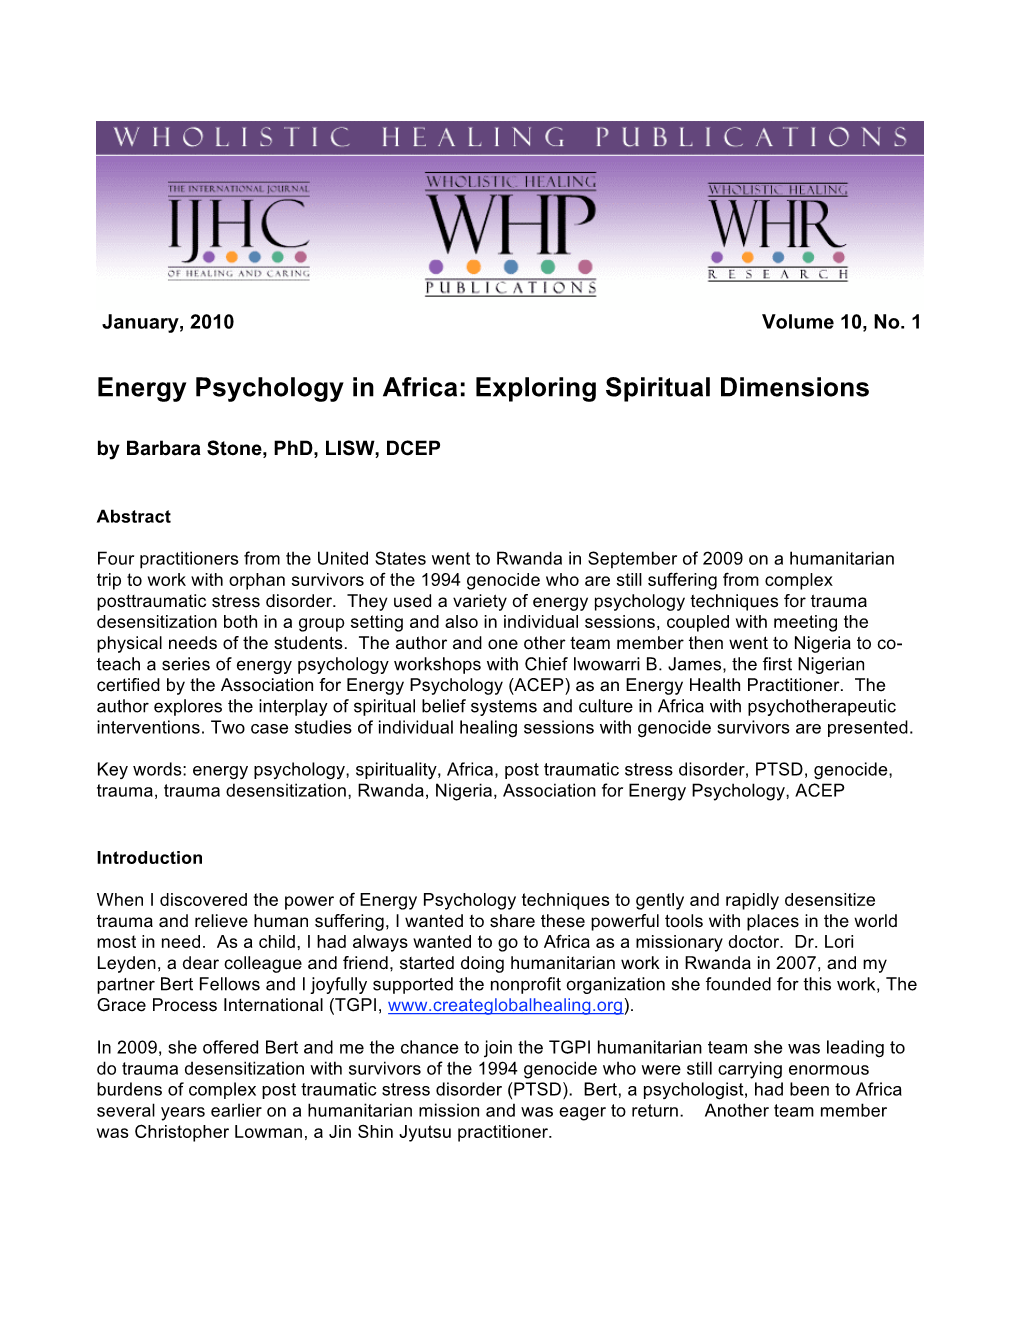 Energy Psychology in Africa: Exploring Spiritual Dimensions by Barbara Stone, Phd, LISW, DCEP